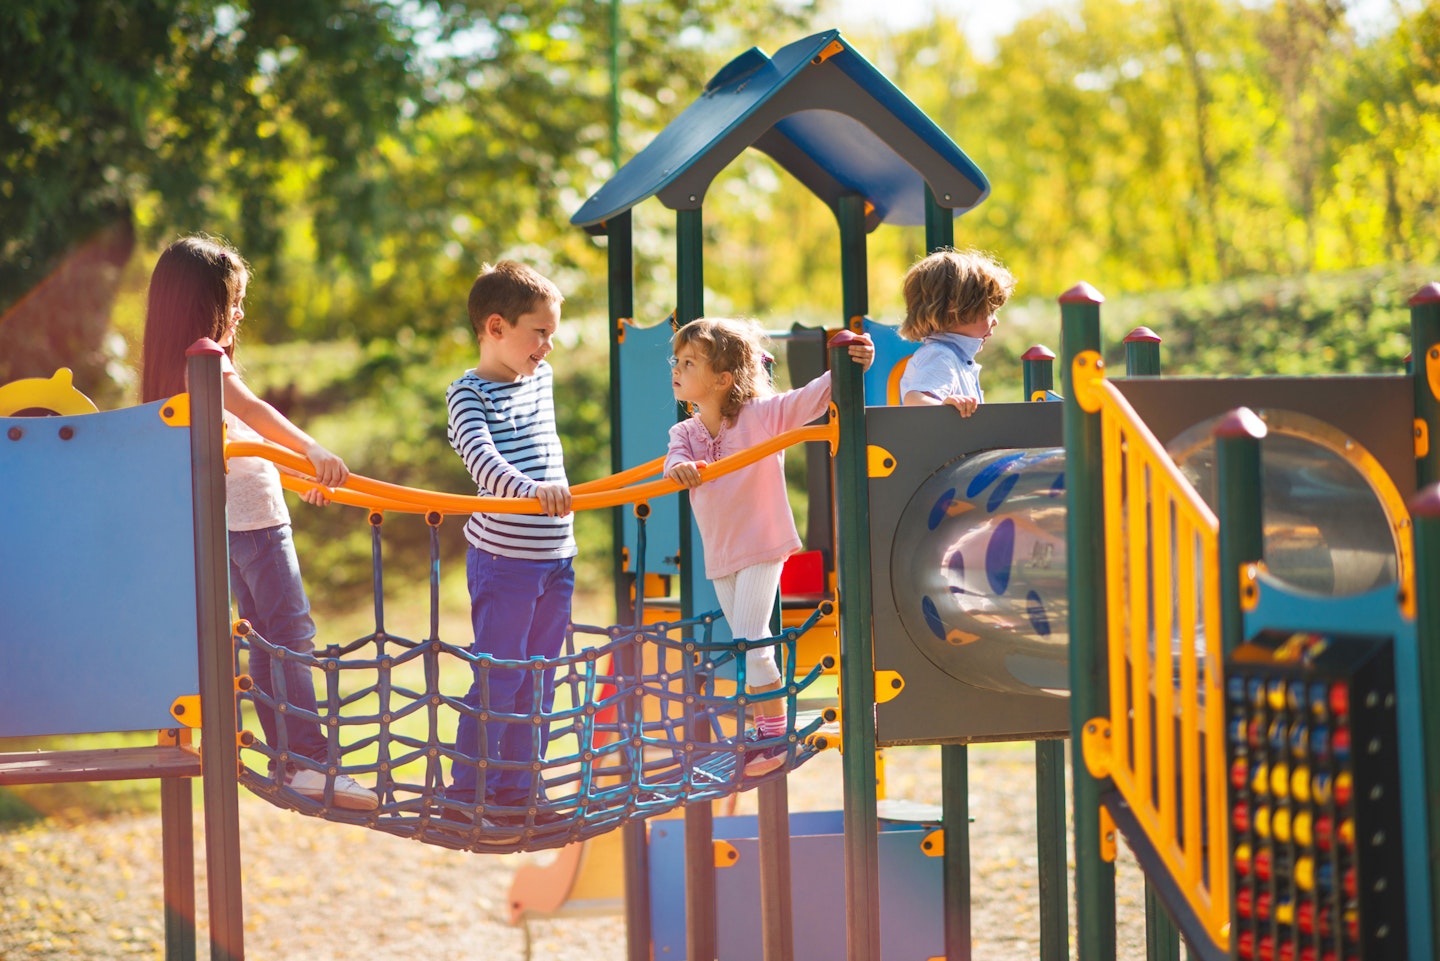 How do I find parks near me with playgrounds?